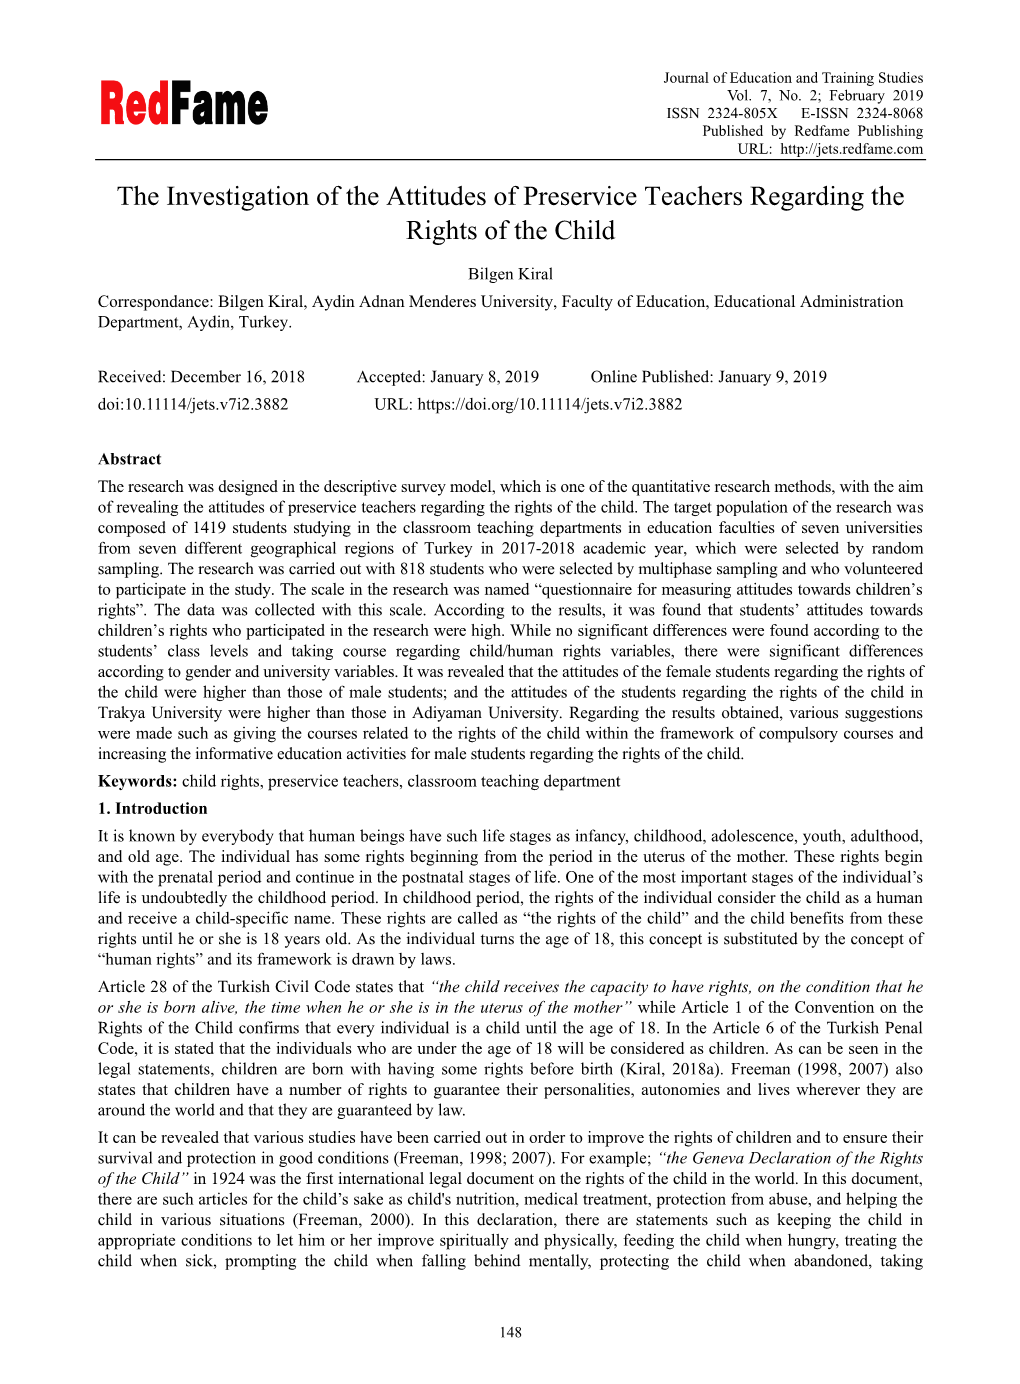 The Investigation of the Attitudes of Preservice Teachers Regarding the Rights of the Child